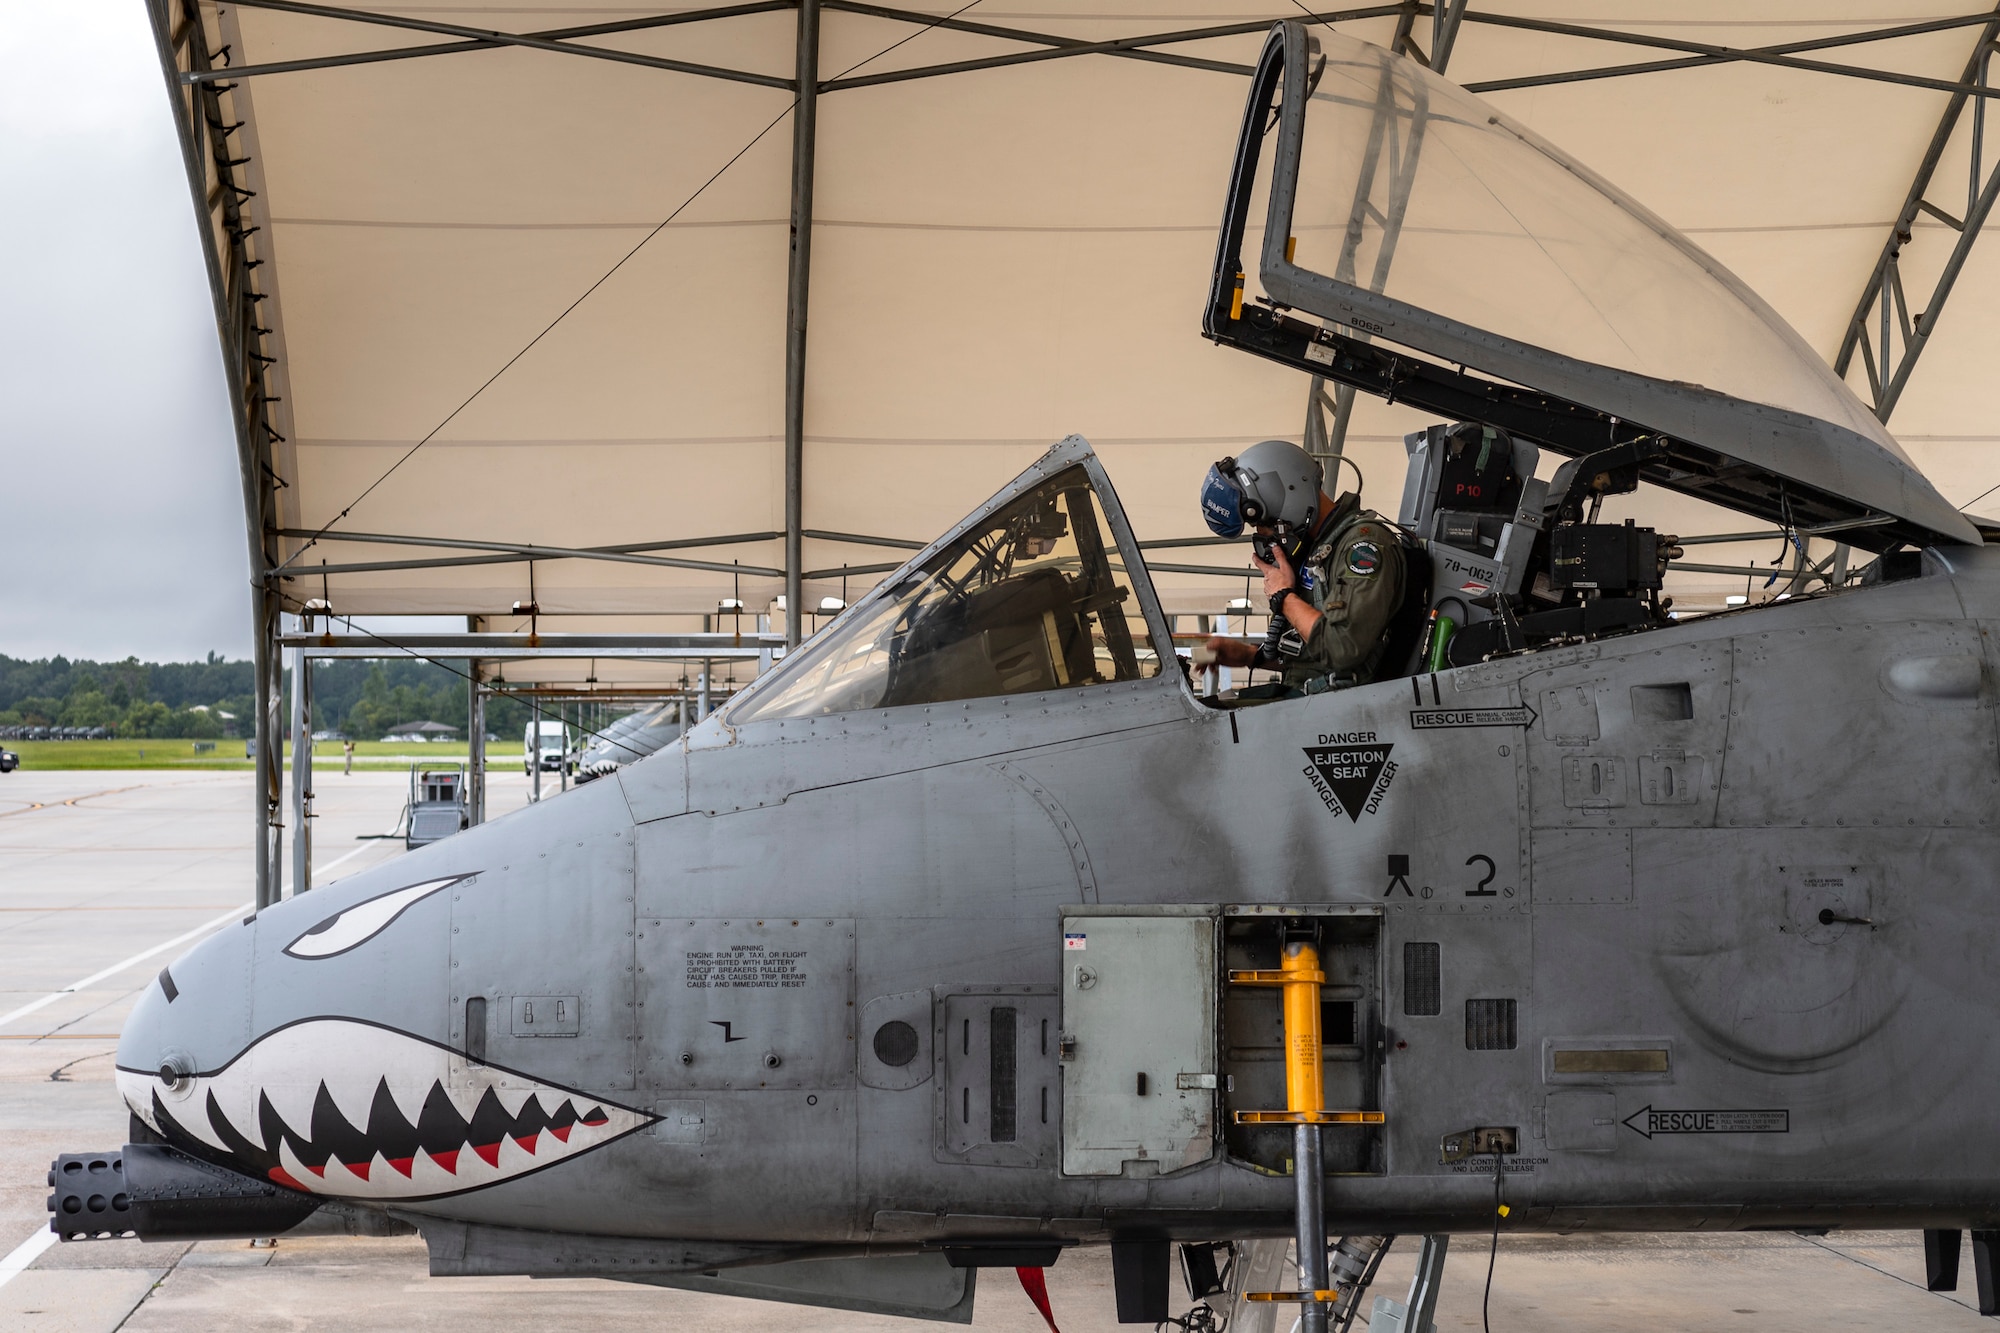 Maj. Adam Peterson, 74th Fighter Squadron (FS) A-10C Thunderbolt II pilot, adjusts his mask before departing for Jaded Thunder, Aug. 2, 2019, at Moody Air Force Base, Ga. Jaded Thunder is a joint services exercise to complete training requirements and prepare for future deployments. It includes joint forces integration by members of U.S. Air Force, Marine Corps, Navy and Army units, as well as representatives of the U.S. Special Operations Command. (U.S. Air Force photo by Airman 1st Class Hayden Legg)